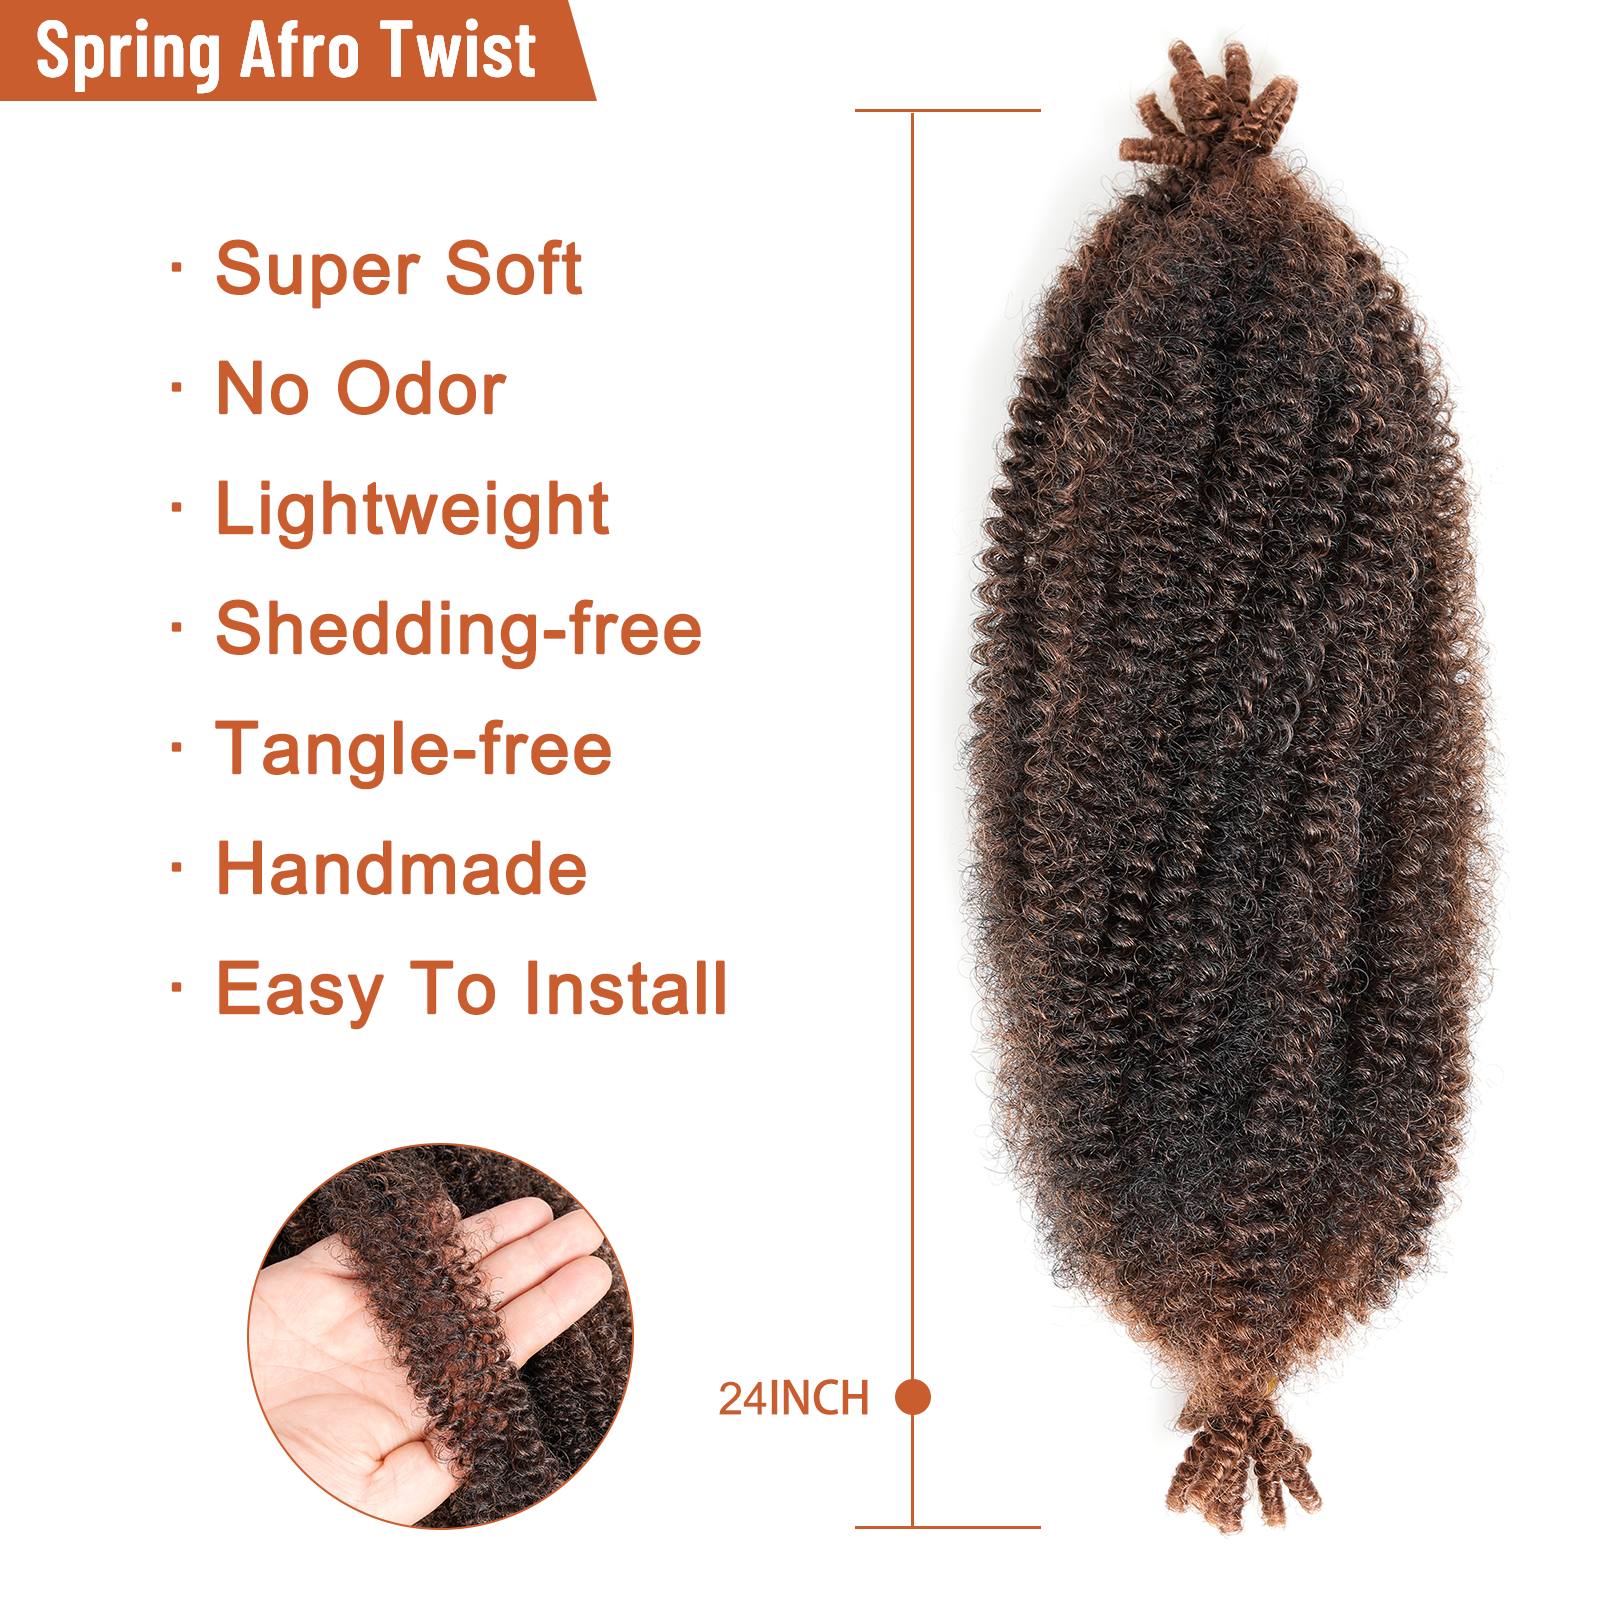 Springy Afro Twist Hair 24